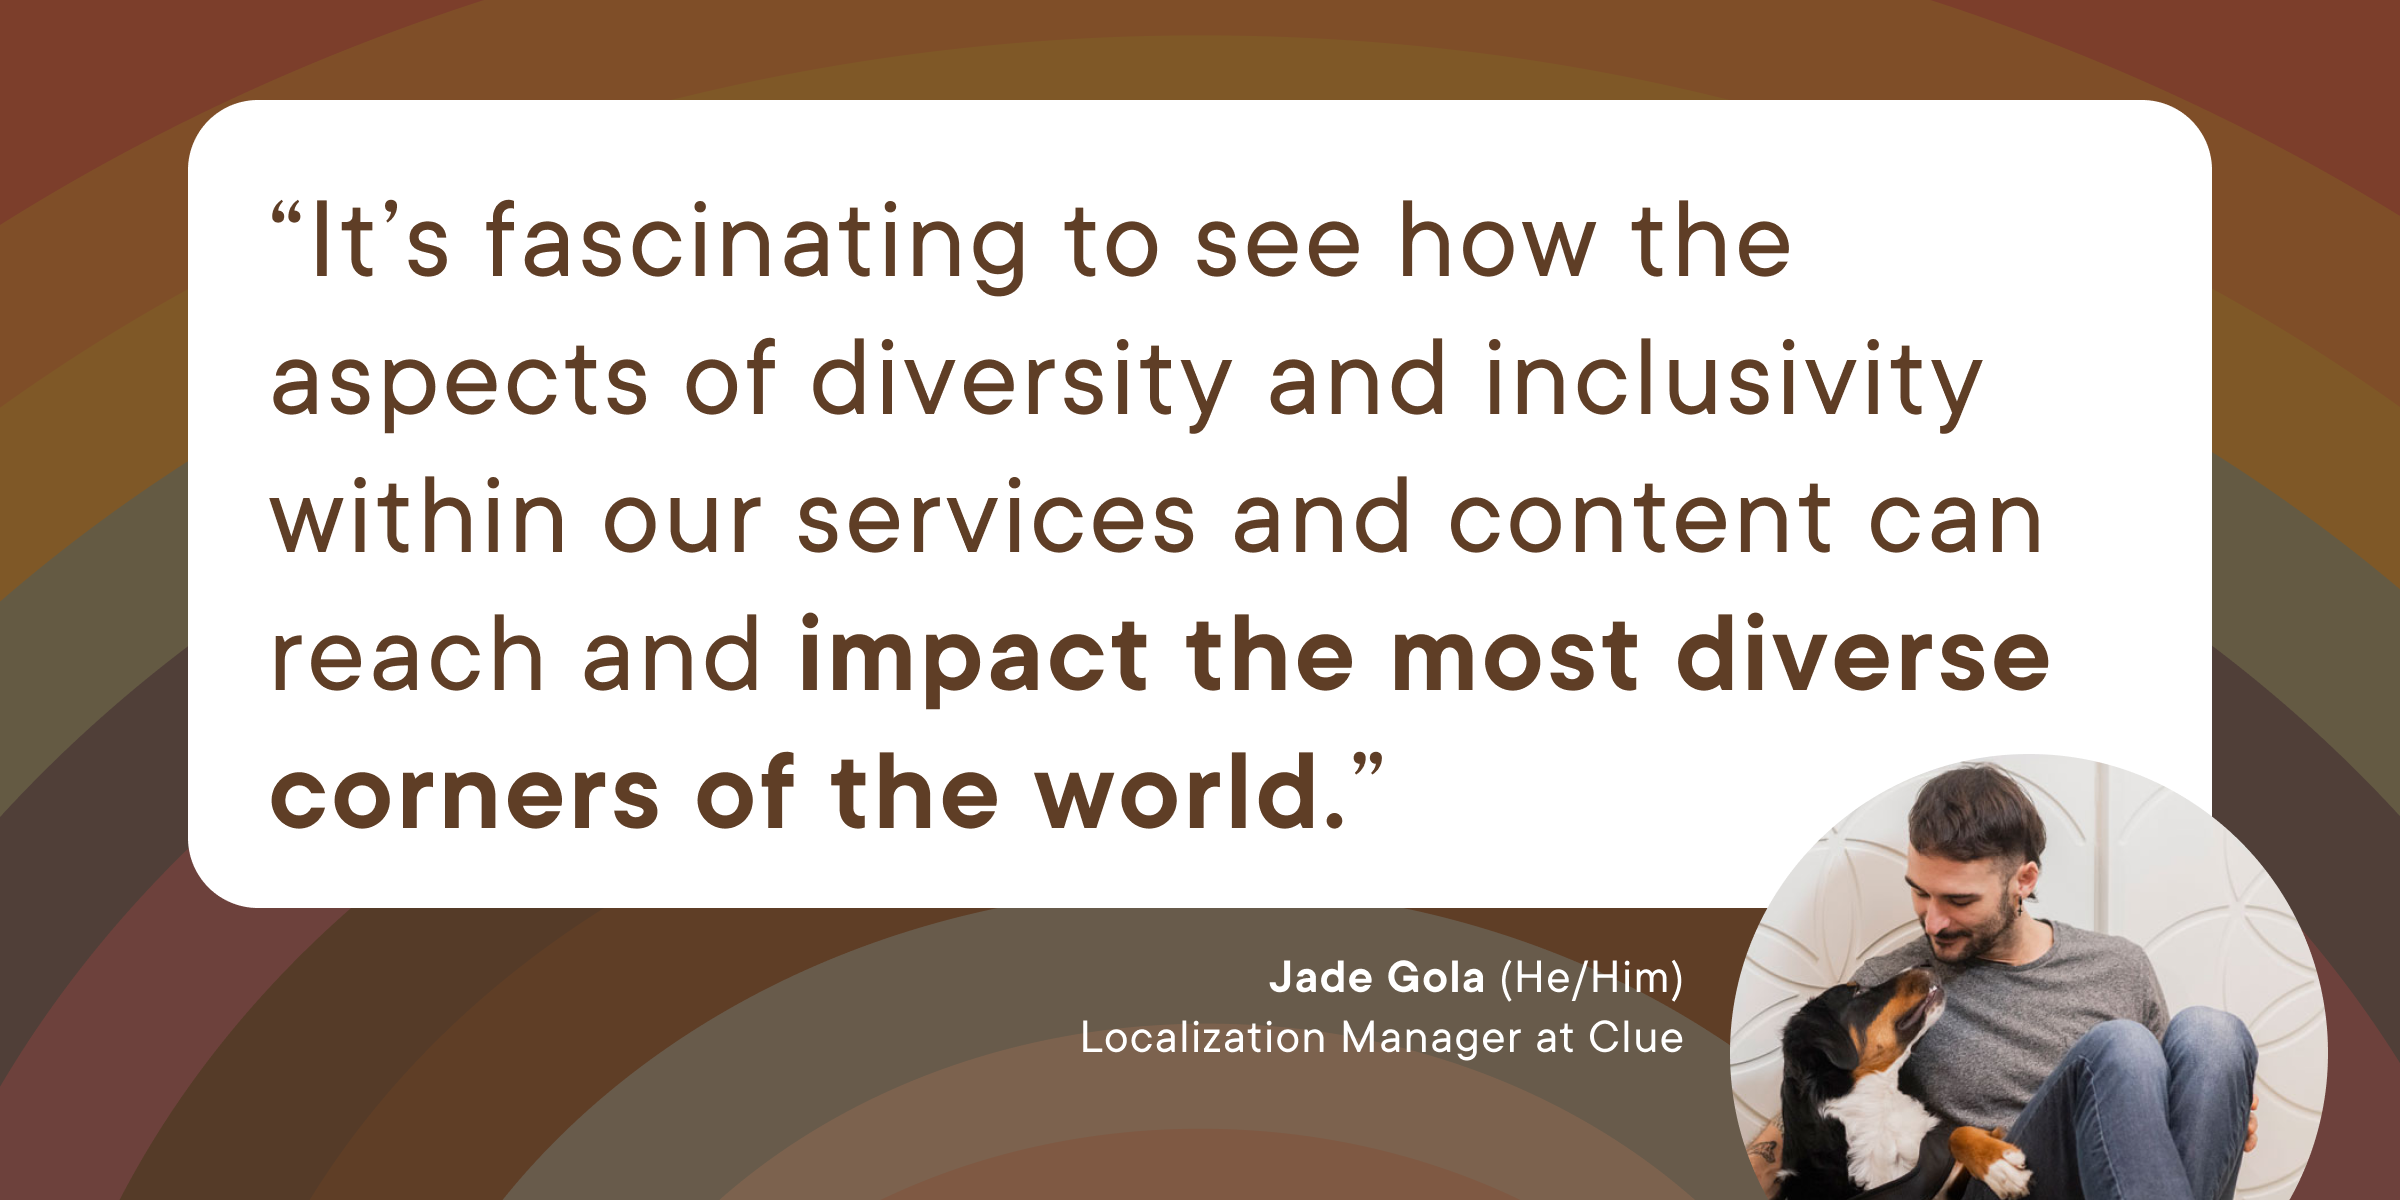 This is a quote from Clue employee Jade: "It's fascinating to see how the aspects of diversity and inclusivity within our services and content can reach and impact the most diverse corners of the world."